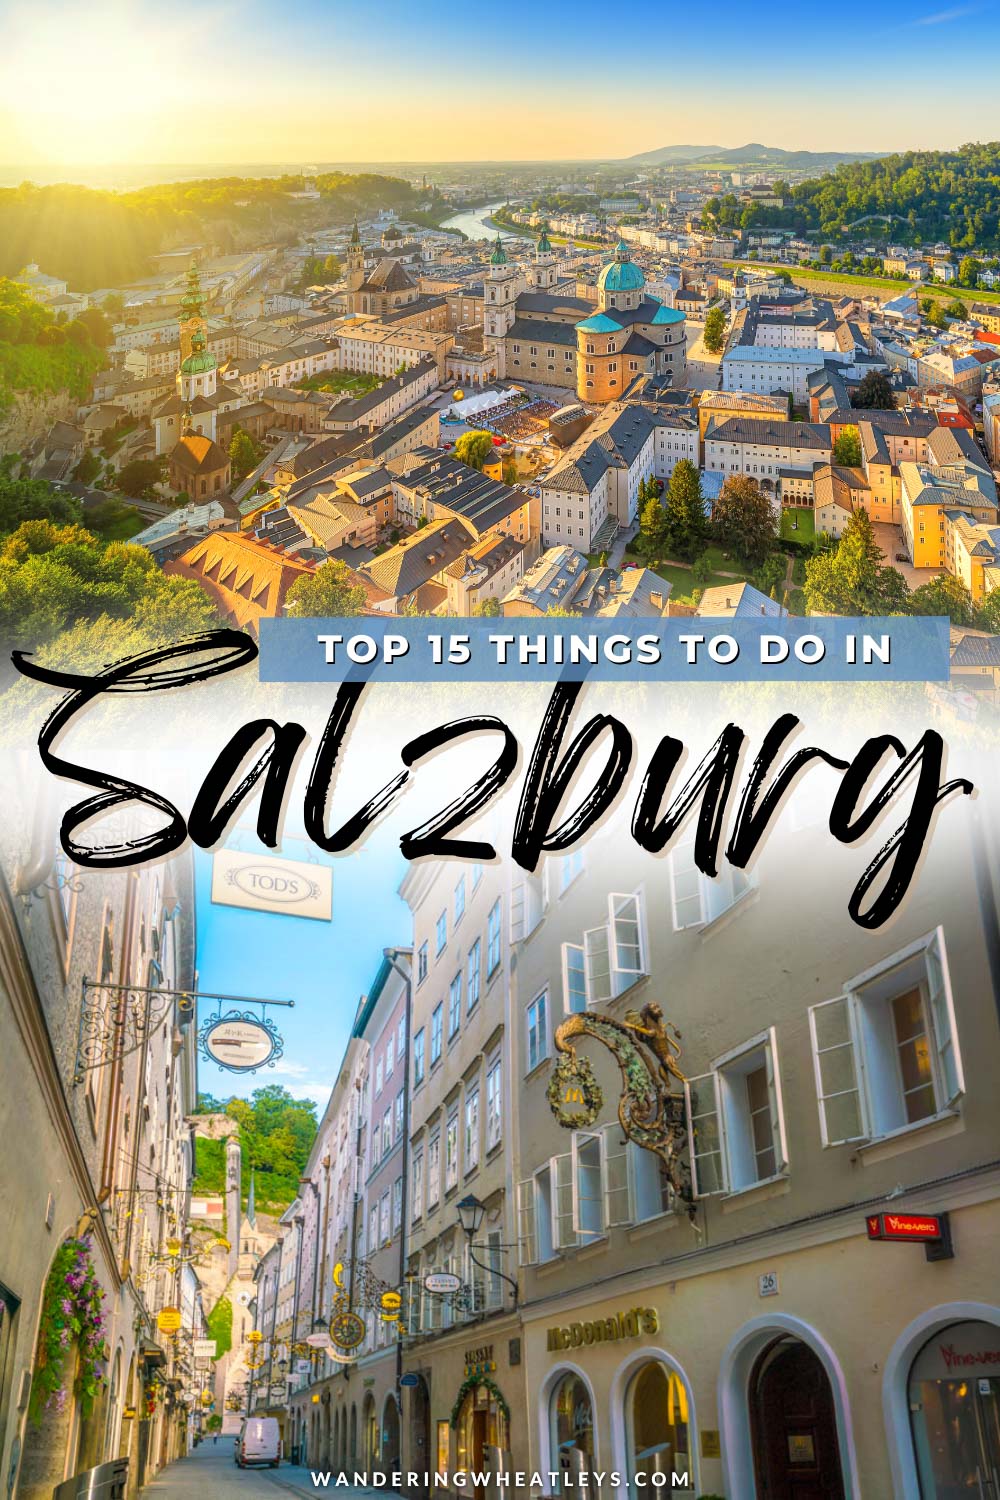 The Best Things to do in Salzburg